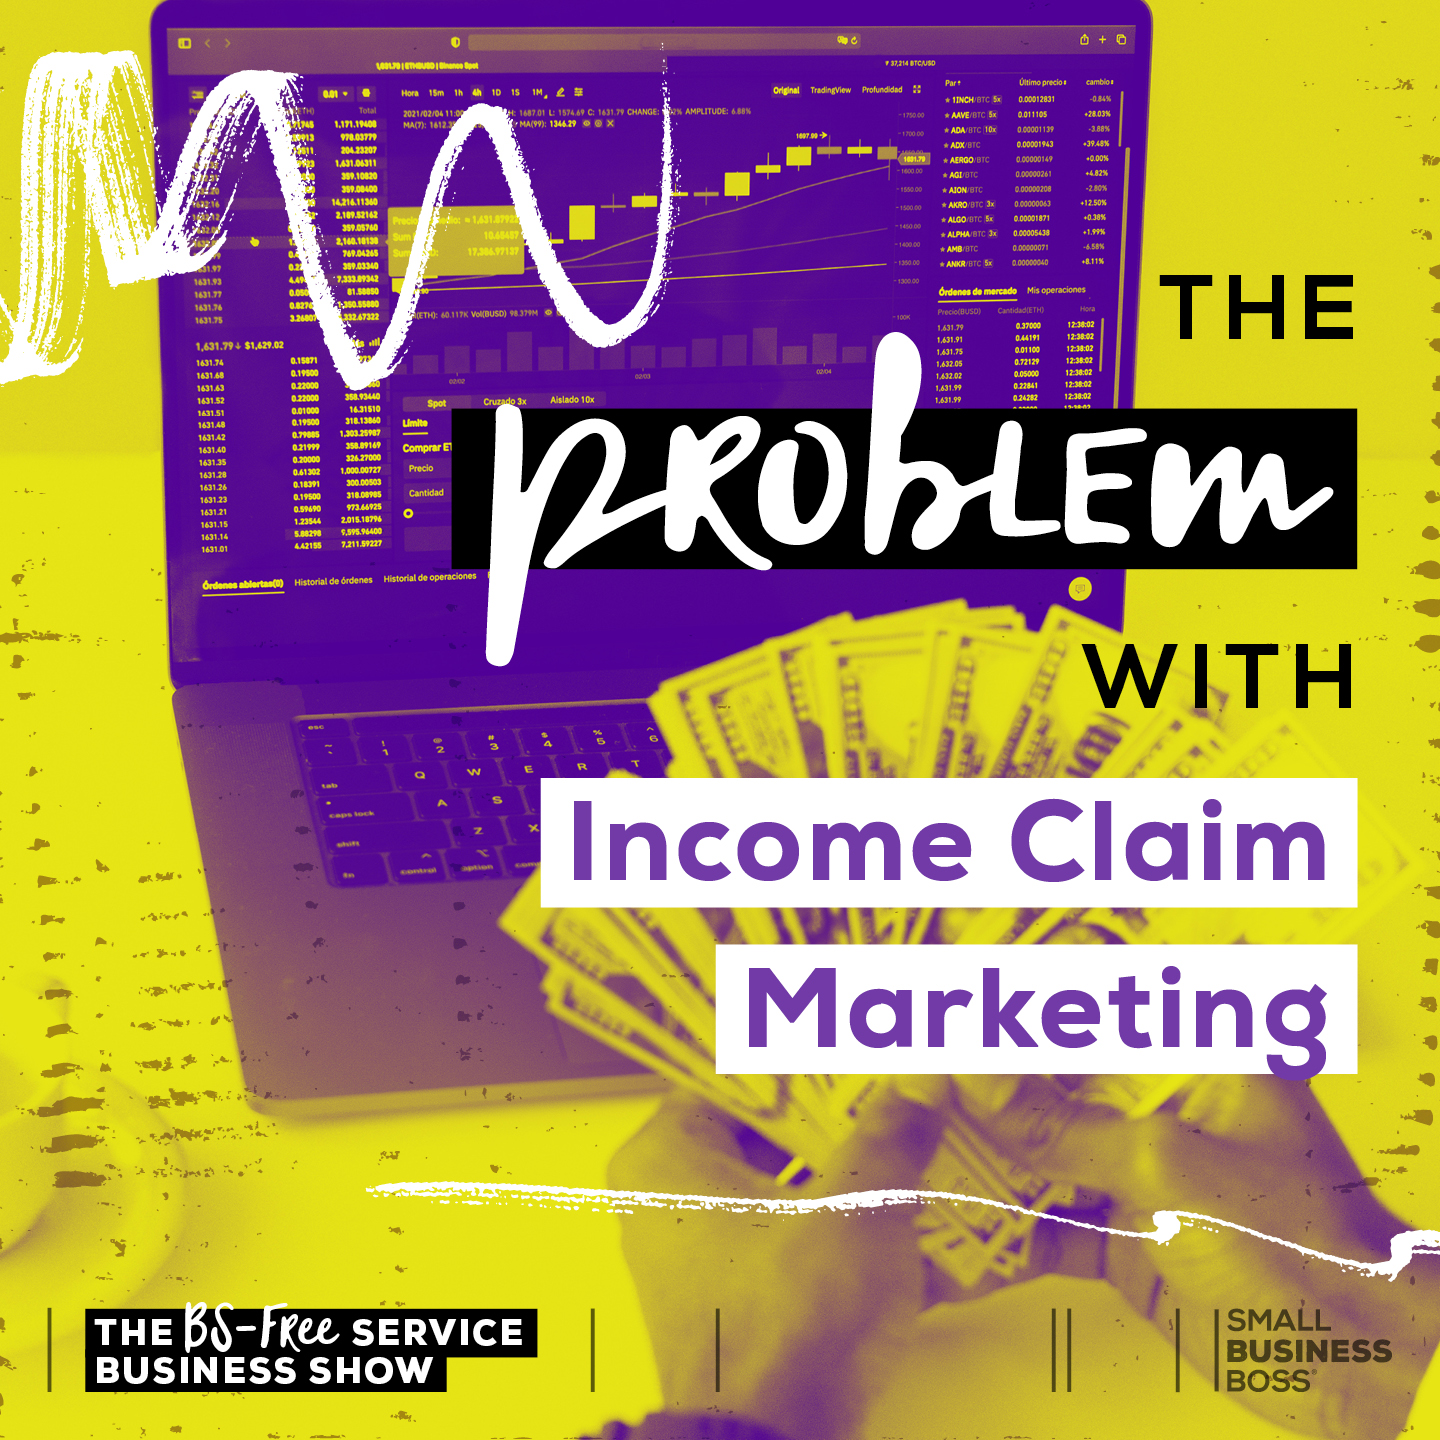 image of business analytics and cash with text that reads "income claim marketing"